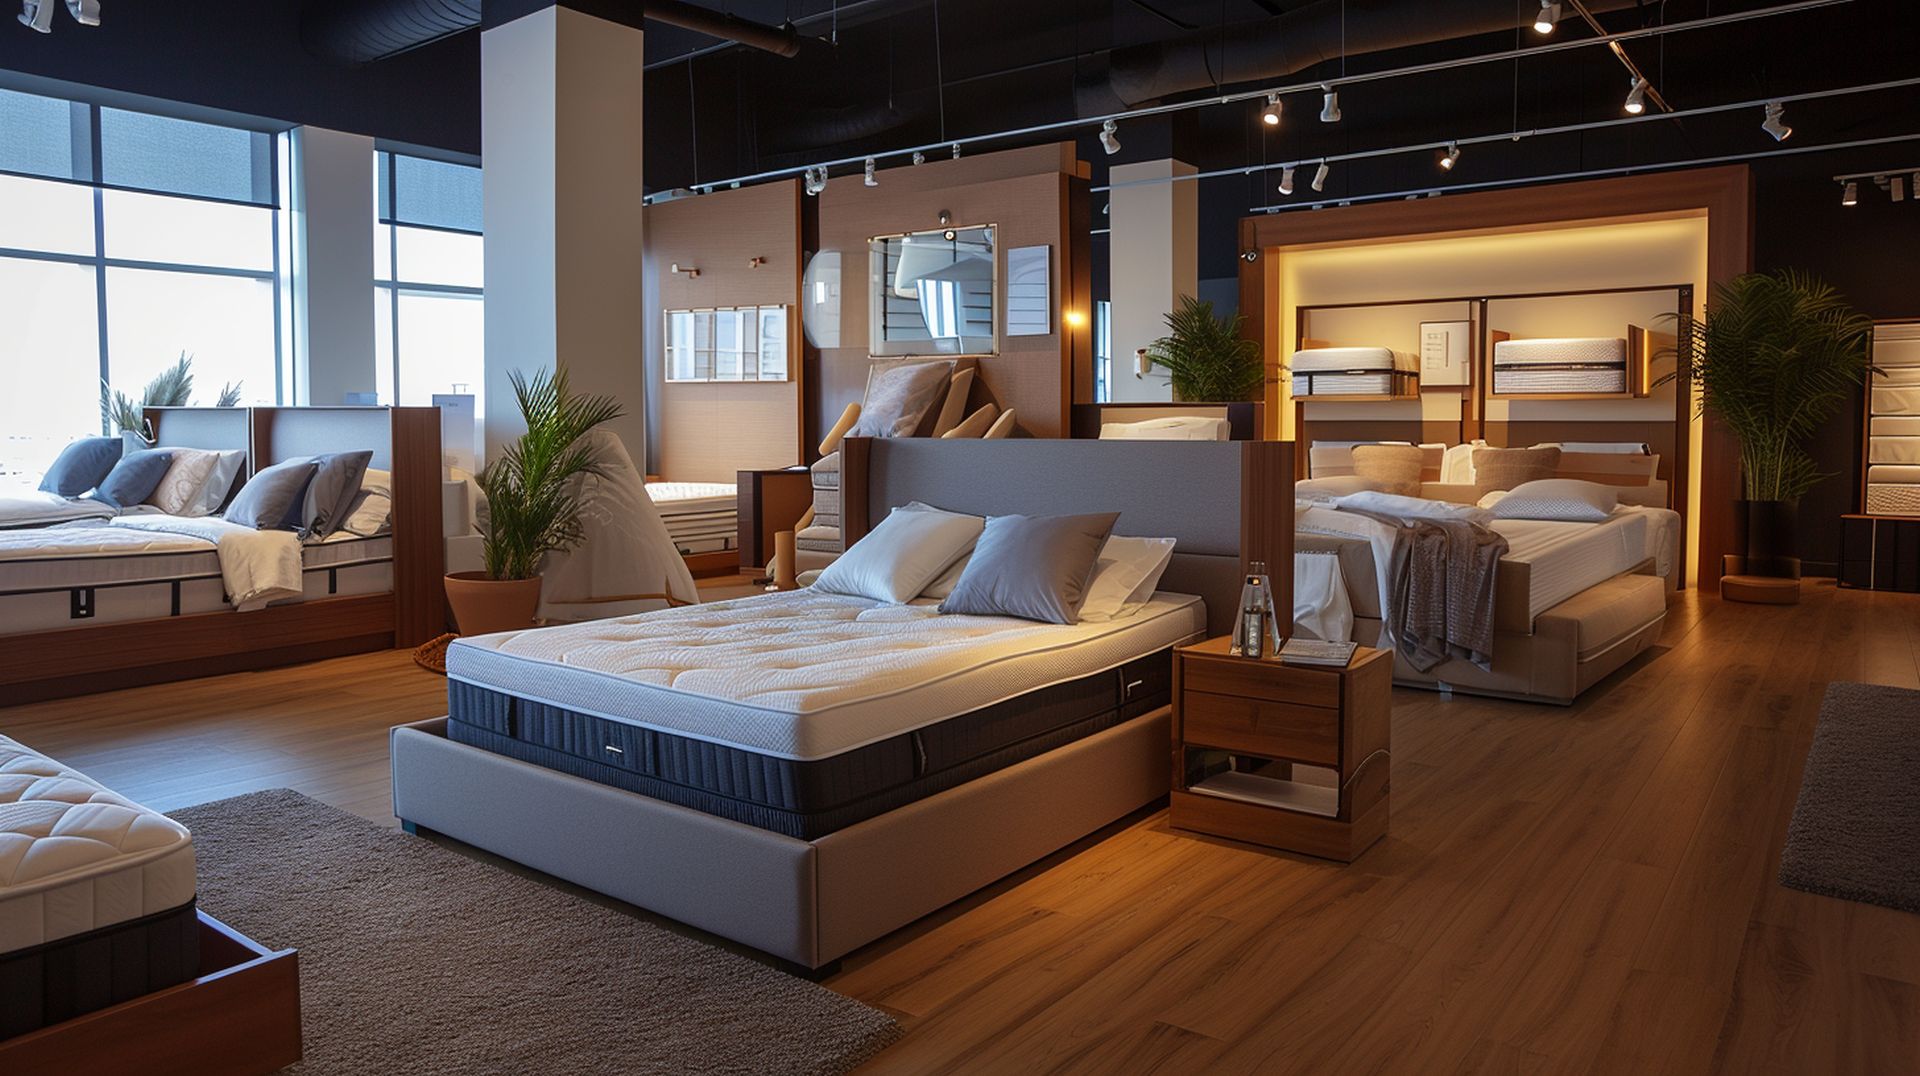 If you're looking for a new bed, mattress stores in Mansfield offer the best customer and delivery service, financing, and warranties in Ohio